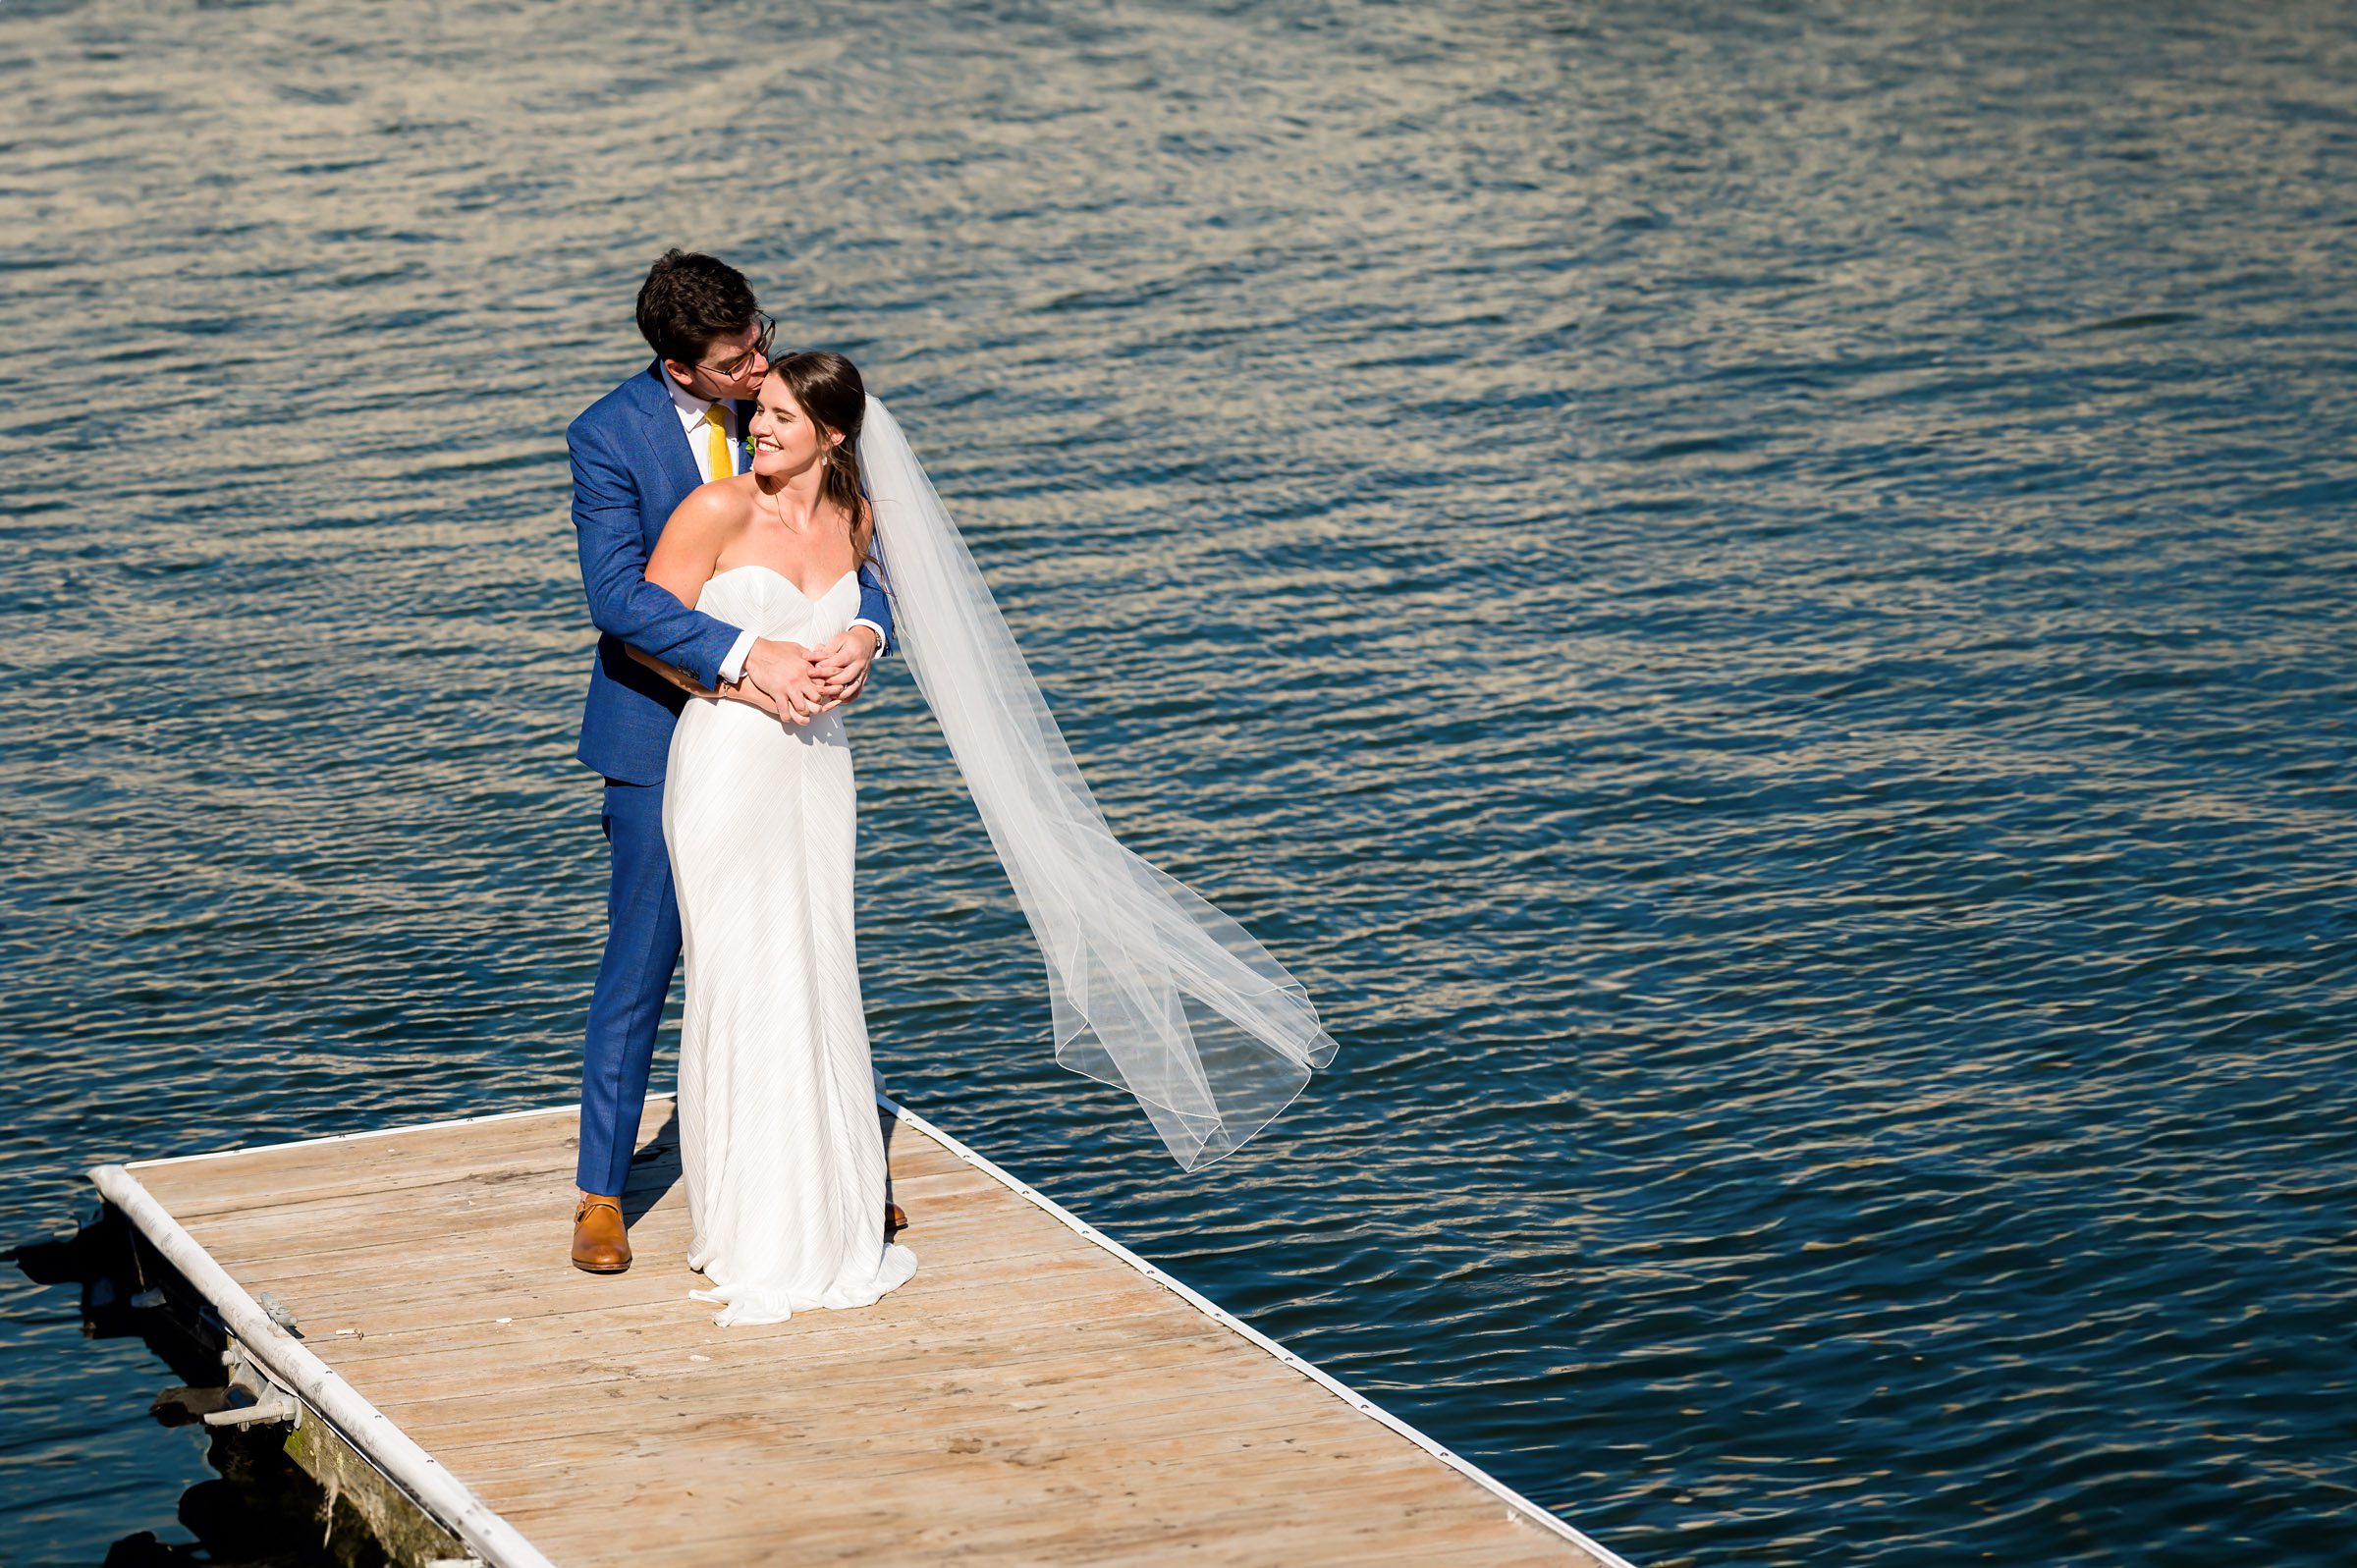 Newlyweds embracing on a wooden dock over tranquil water after their wedding in Stone Harbor NJ before going to their wedding reception at ICONA Windrift